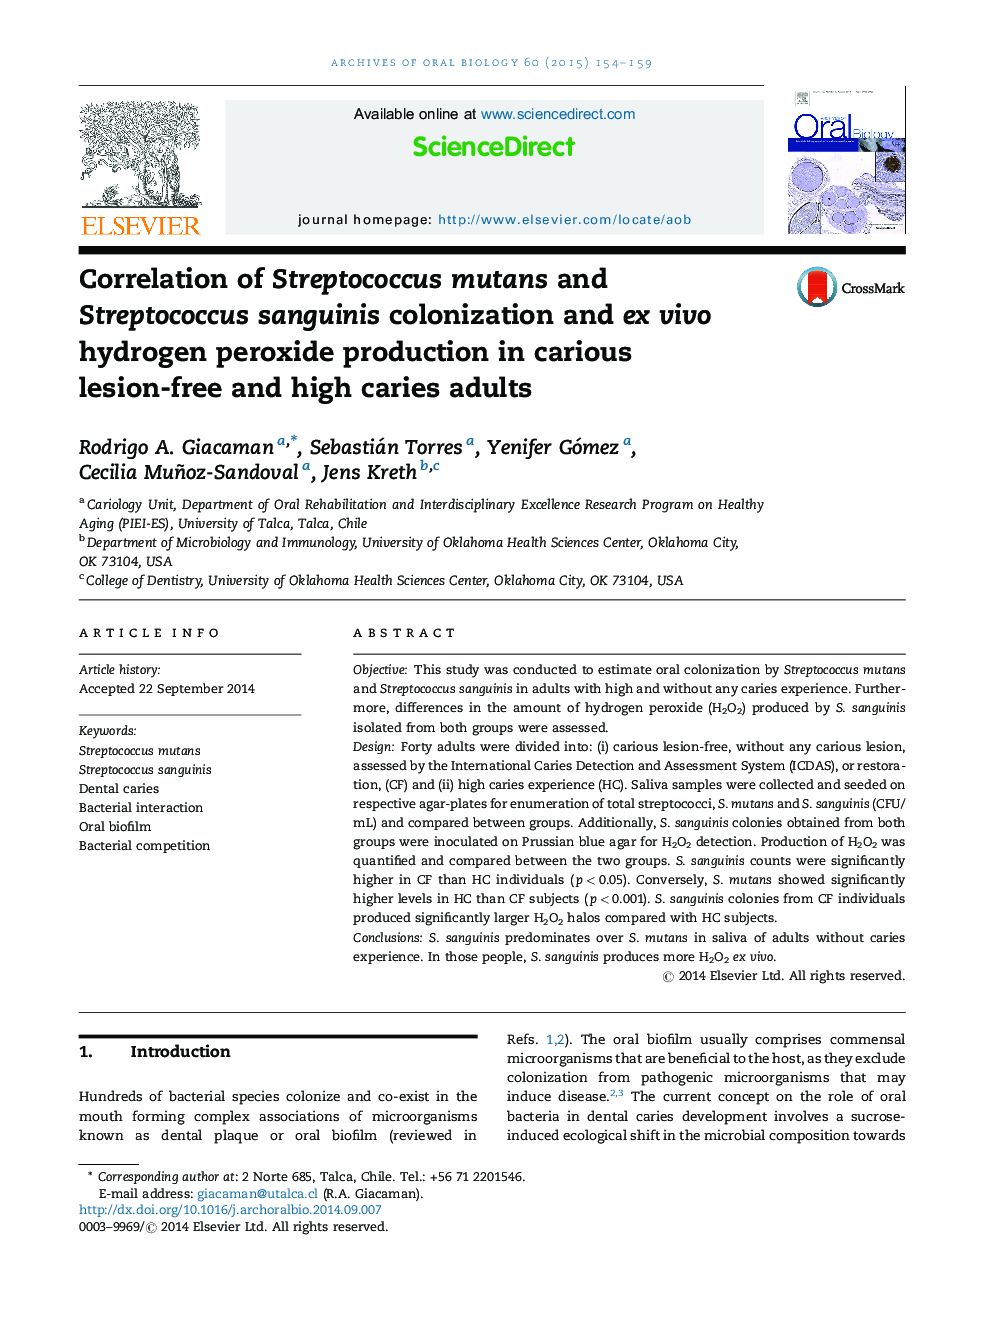 Correlation of Streptococcus mutans and Streptococcus sanguinis colonization and ex vivo hydrogen peroxide production in carious lesion-free and high caries adults